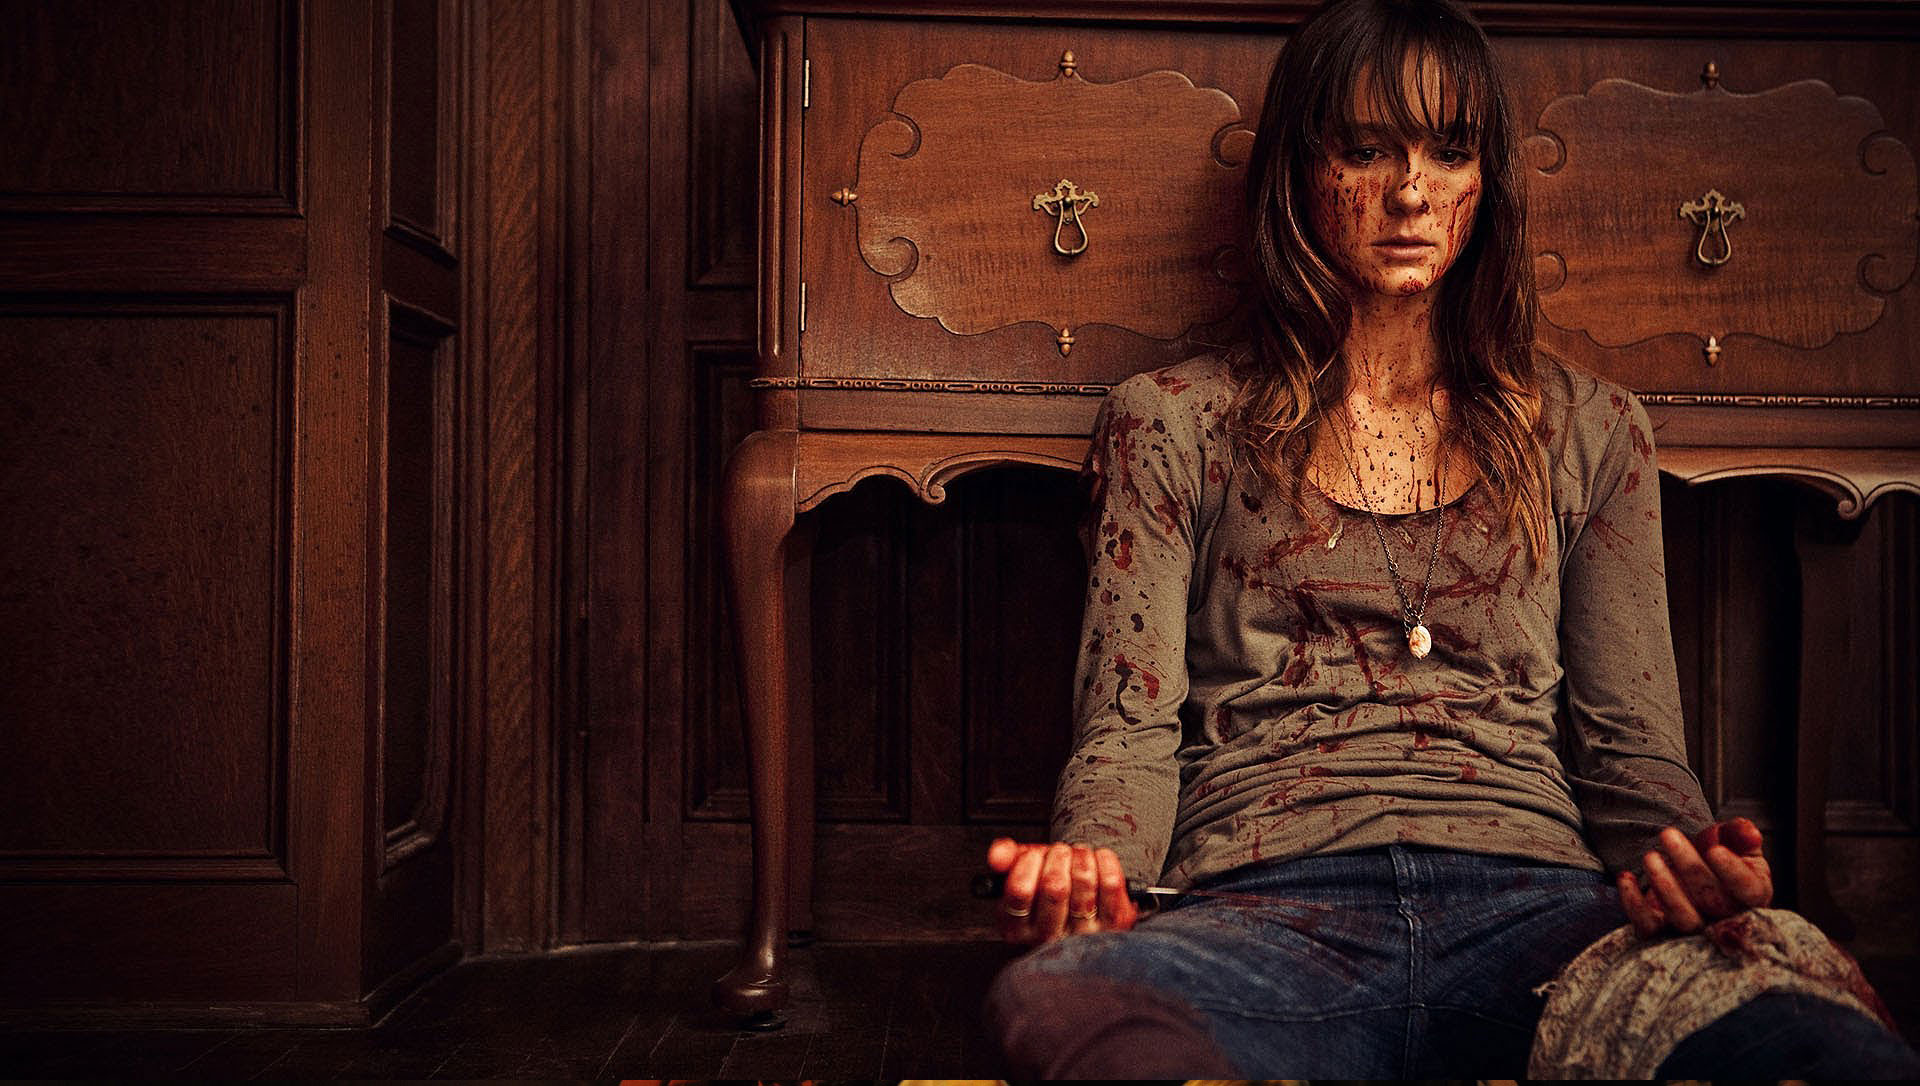 How Horror Films Are Bringing More Gender Equality to Hollywood